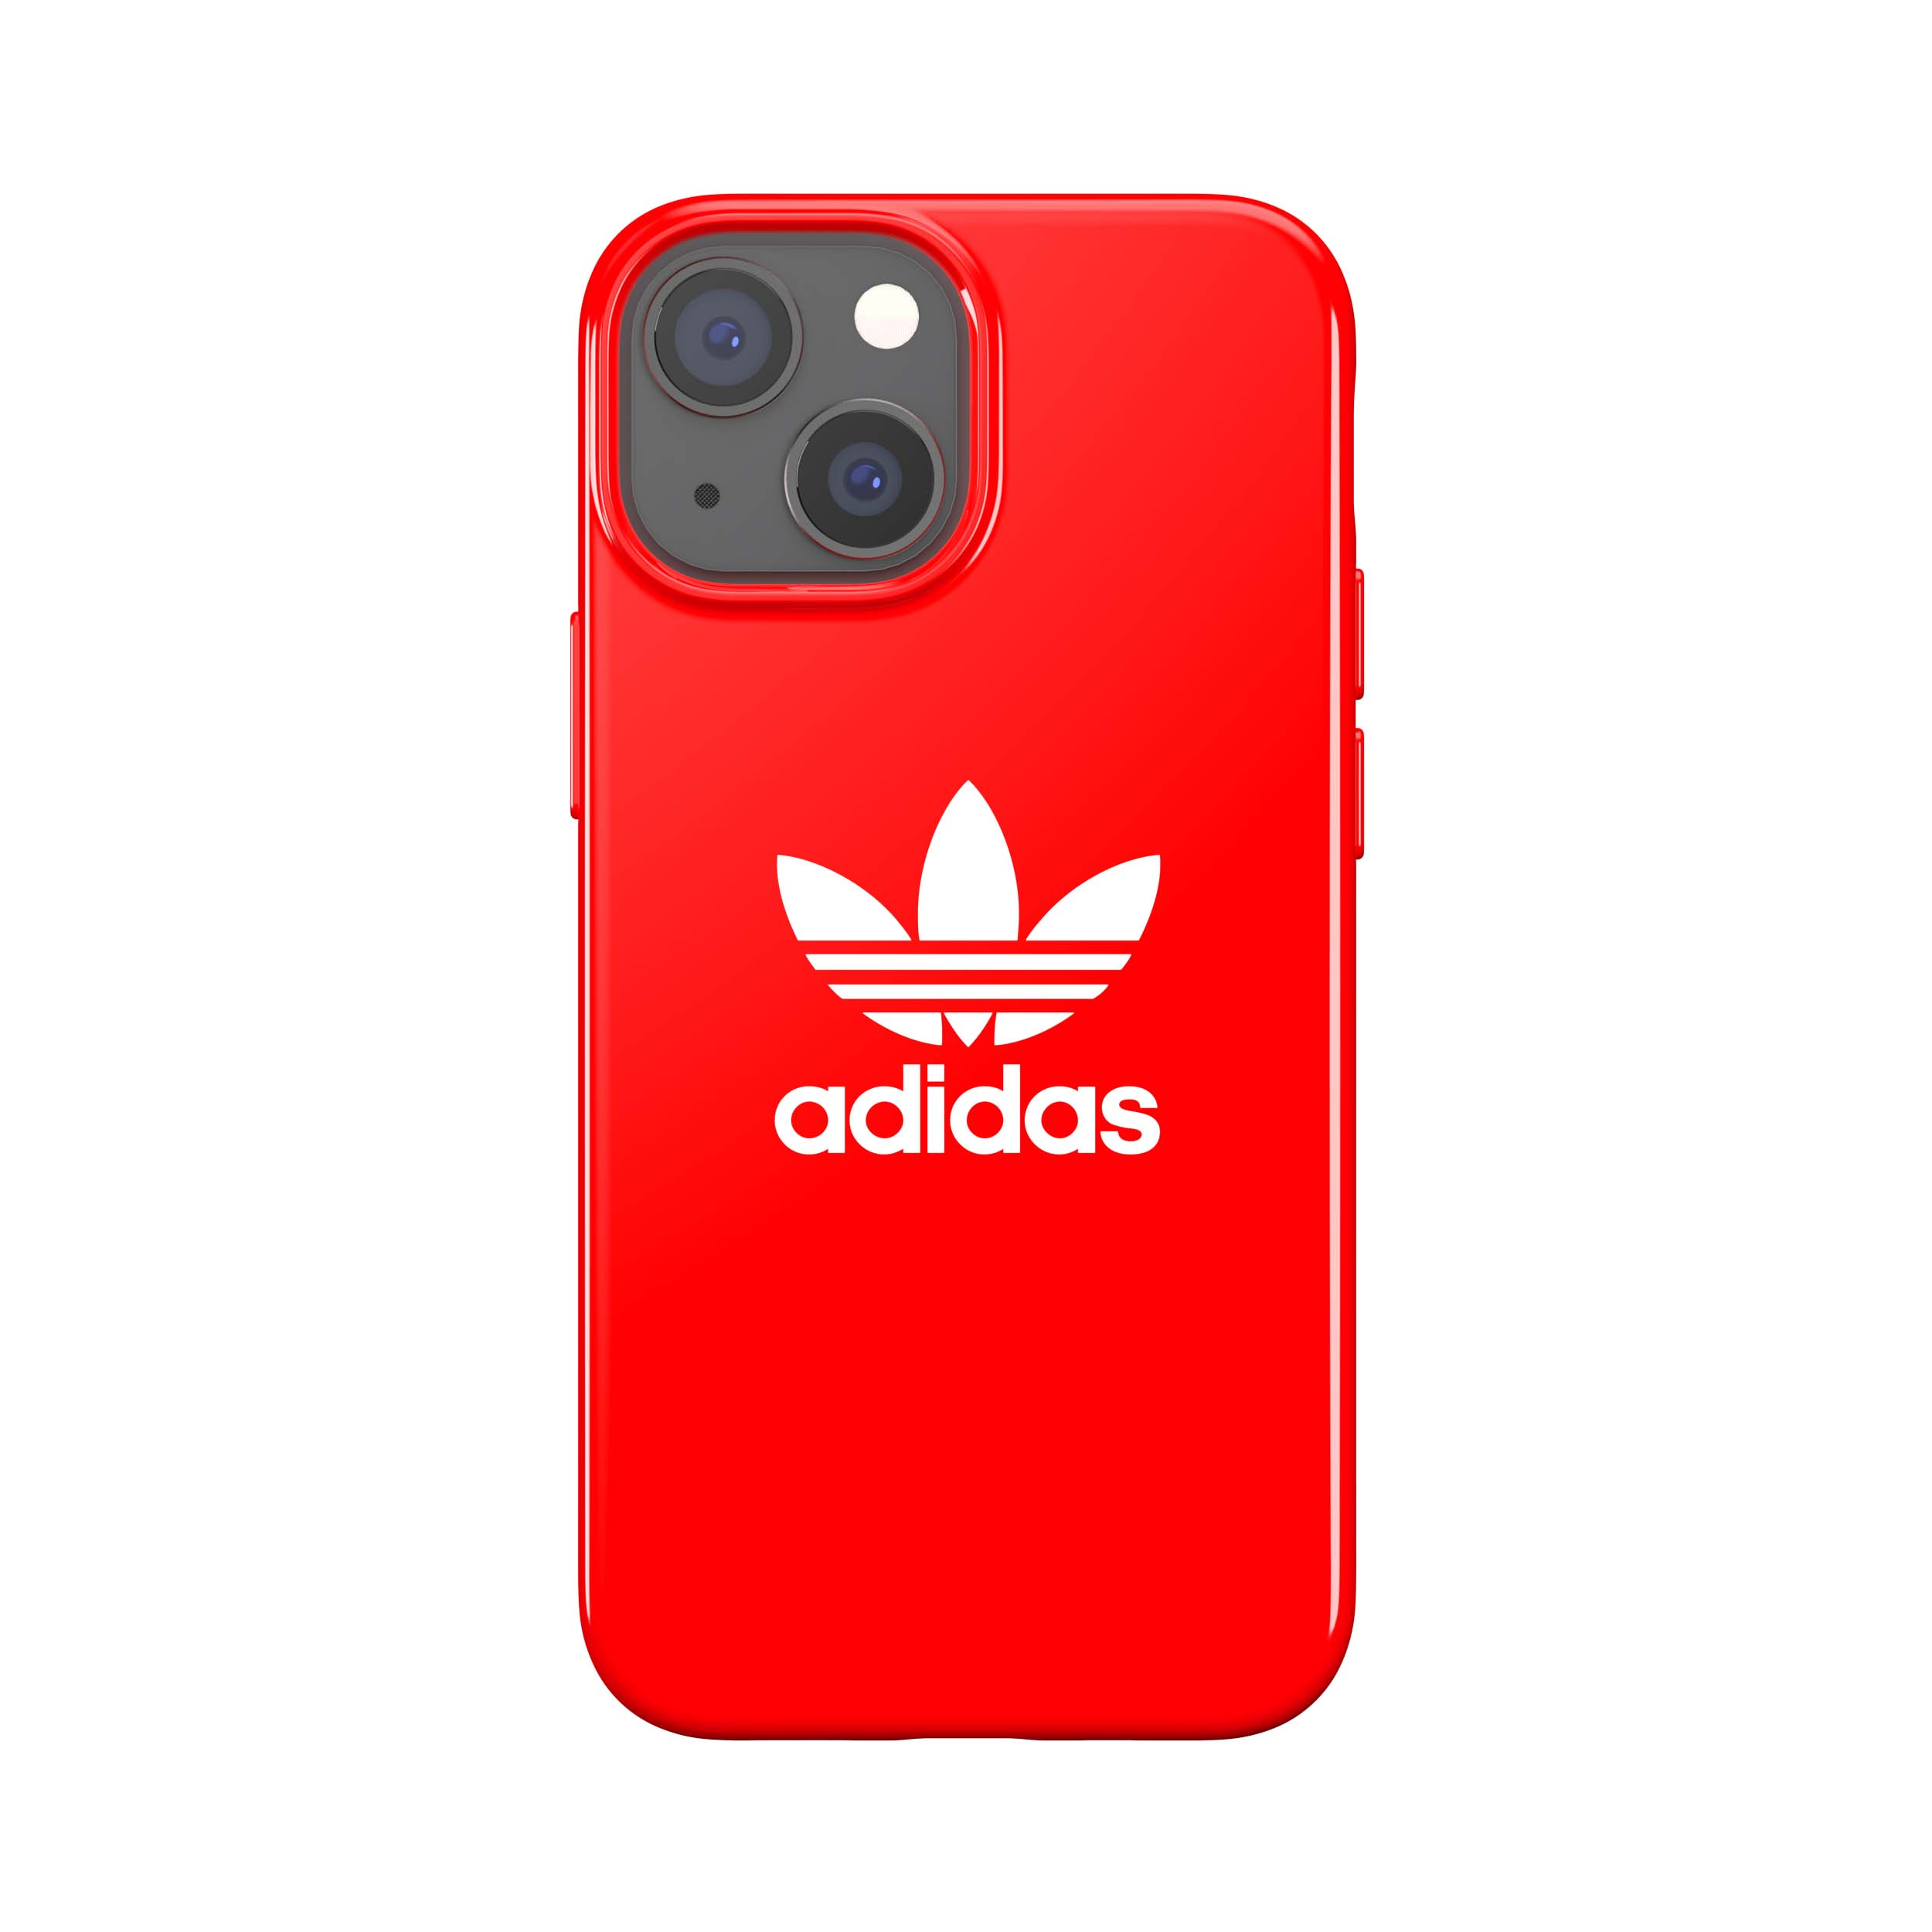 13 ADIDAS APPLE, MINI, Trefoil, IPHONE Backcover, Snap RED Case